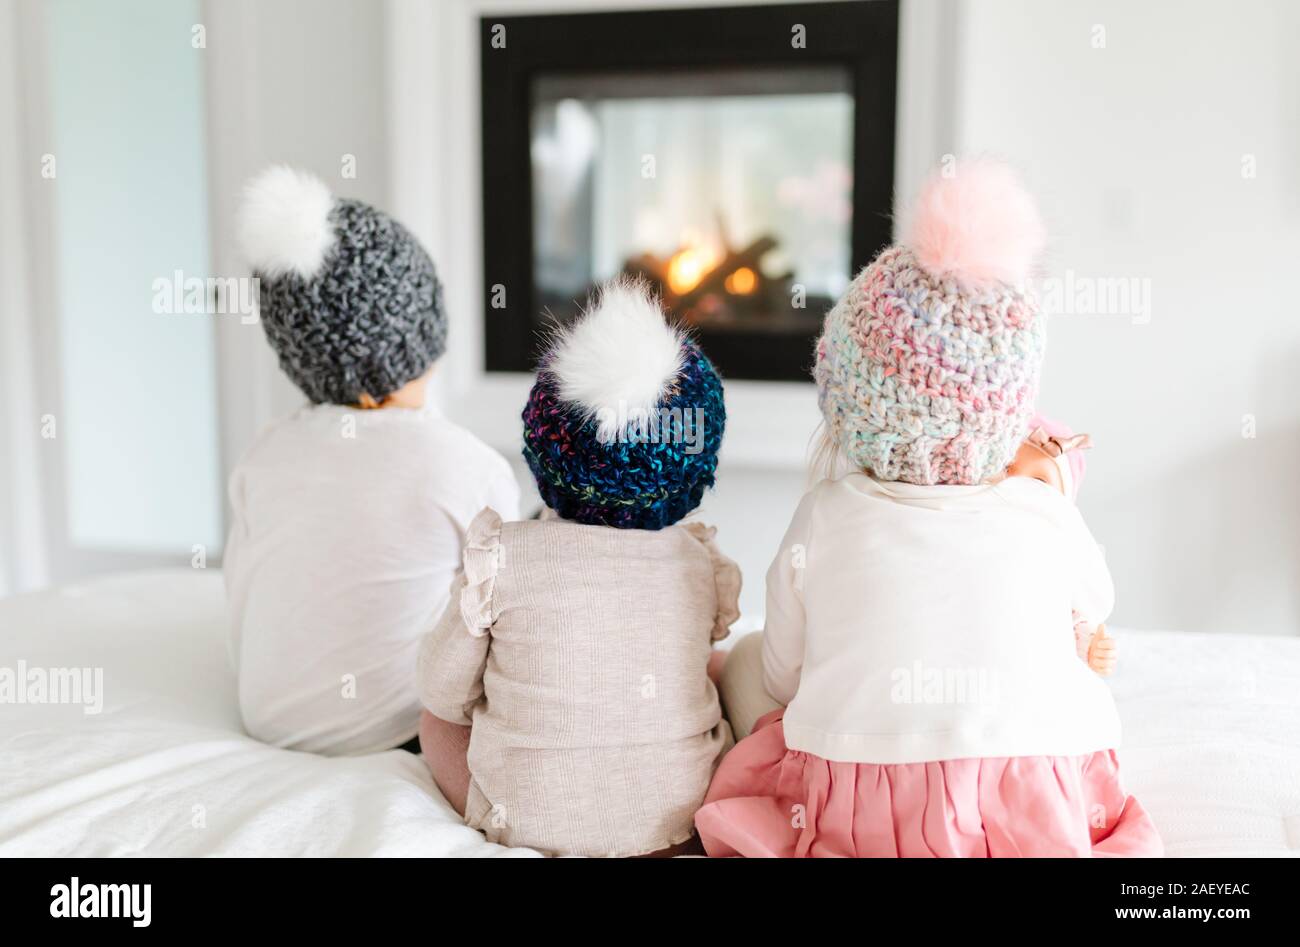 Three toddlers sitting on bed in front of fireplace with knit hats Stock Photo